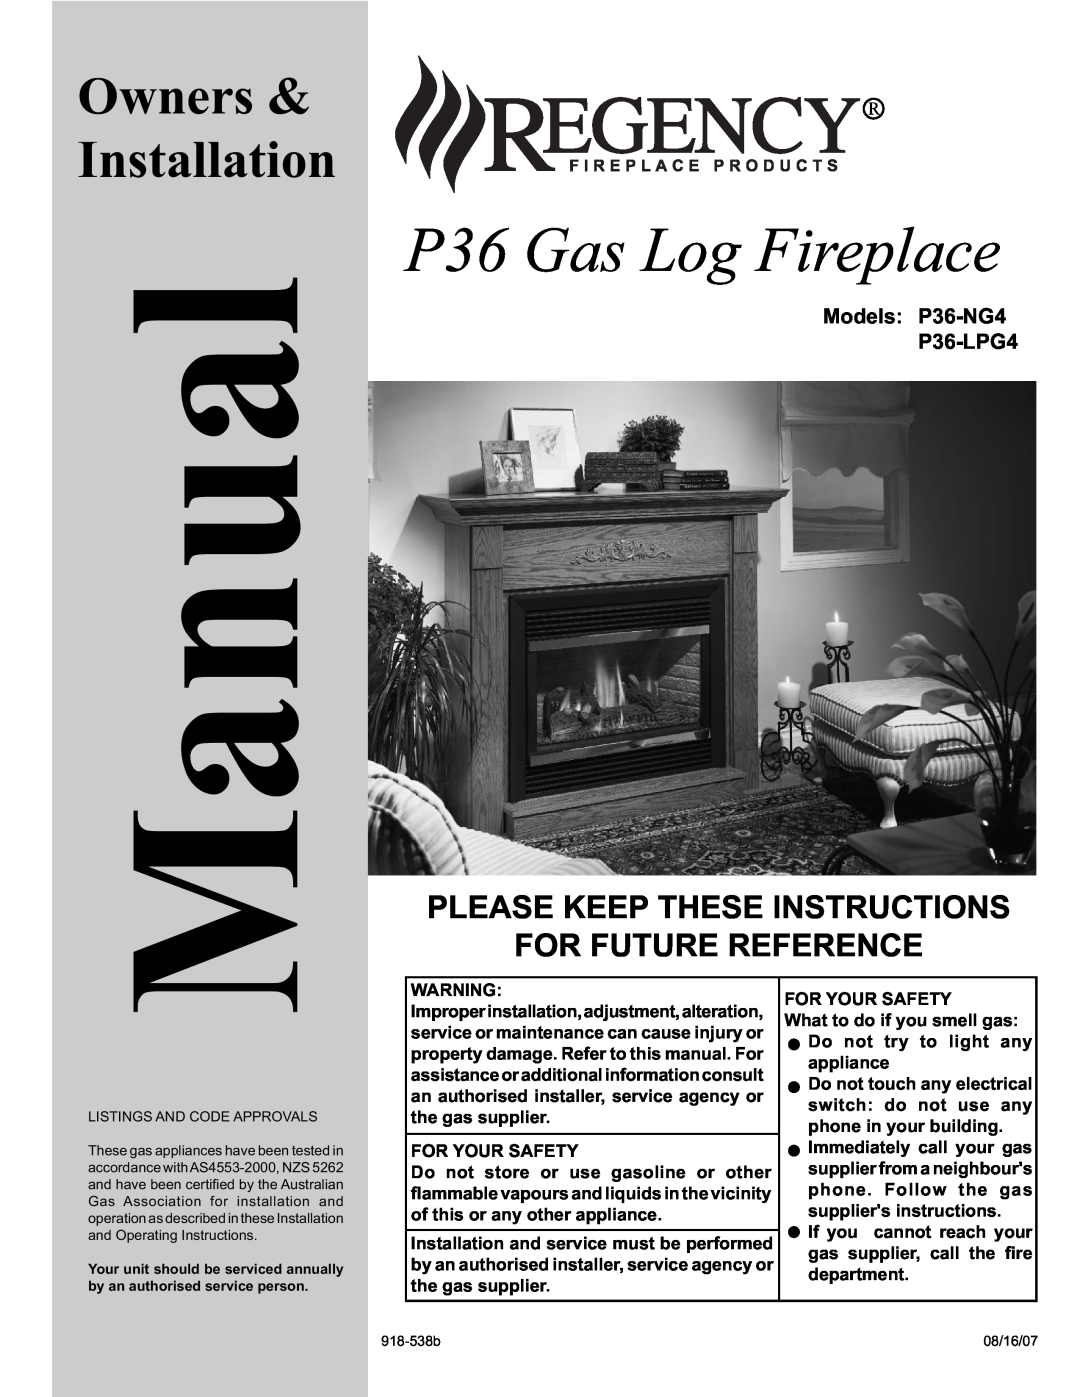 Regency Wraps manual Manual, P36 Gas Log Fireplace, Owners & Installation, Models P36-NG4 P36-LPG4, For Your Safety 